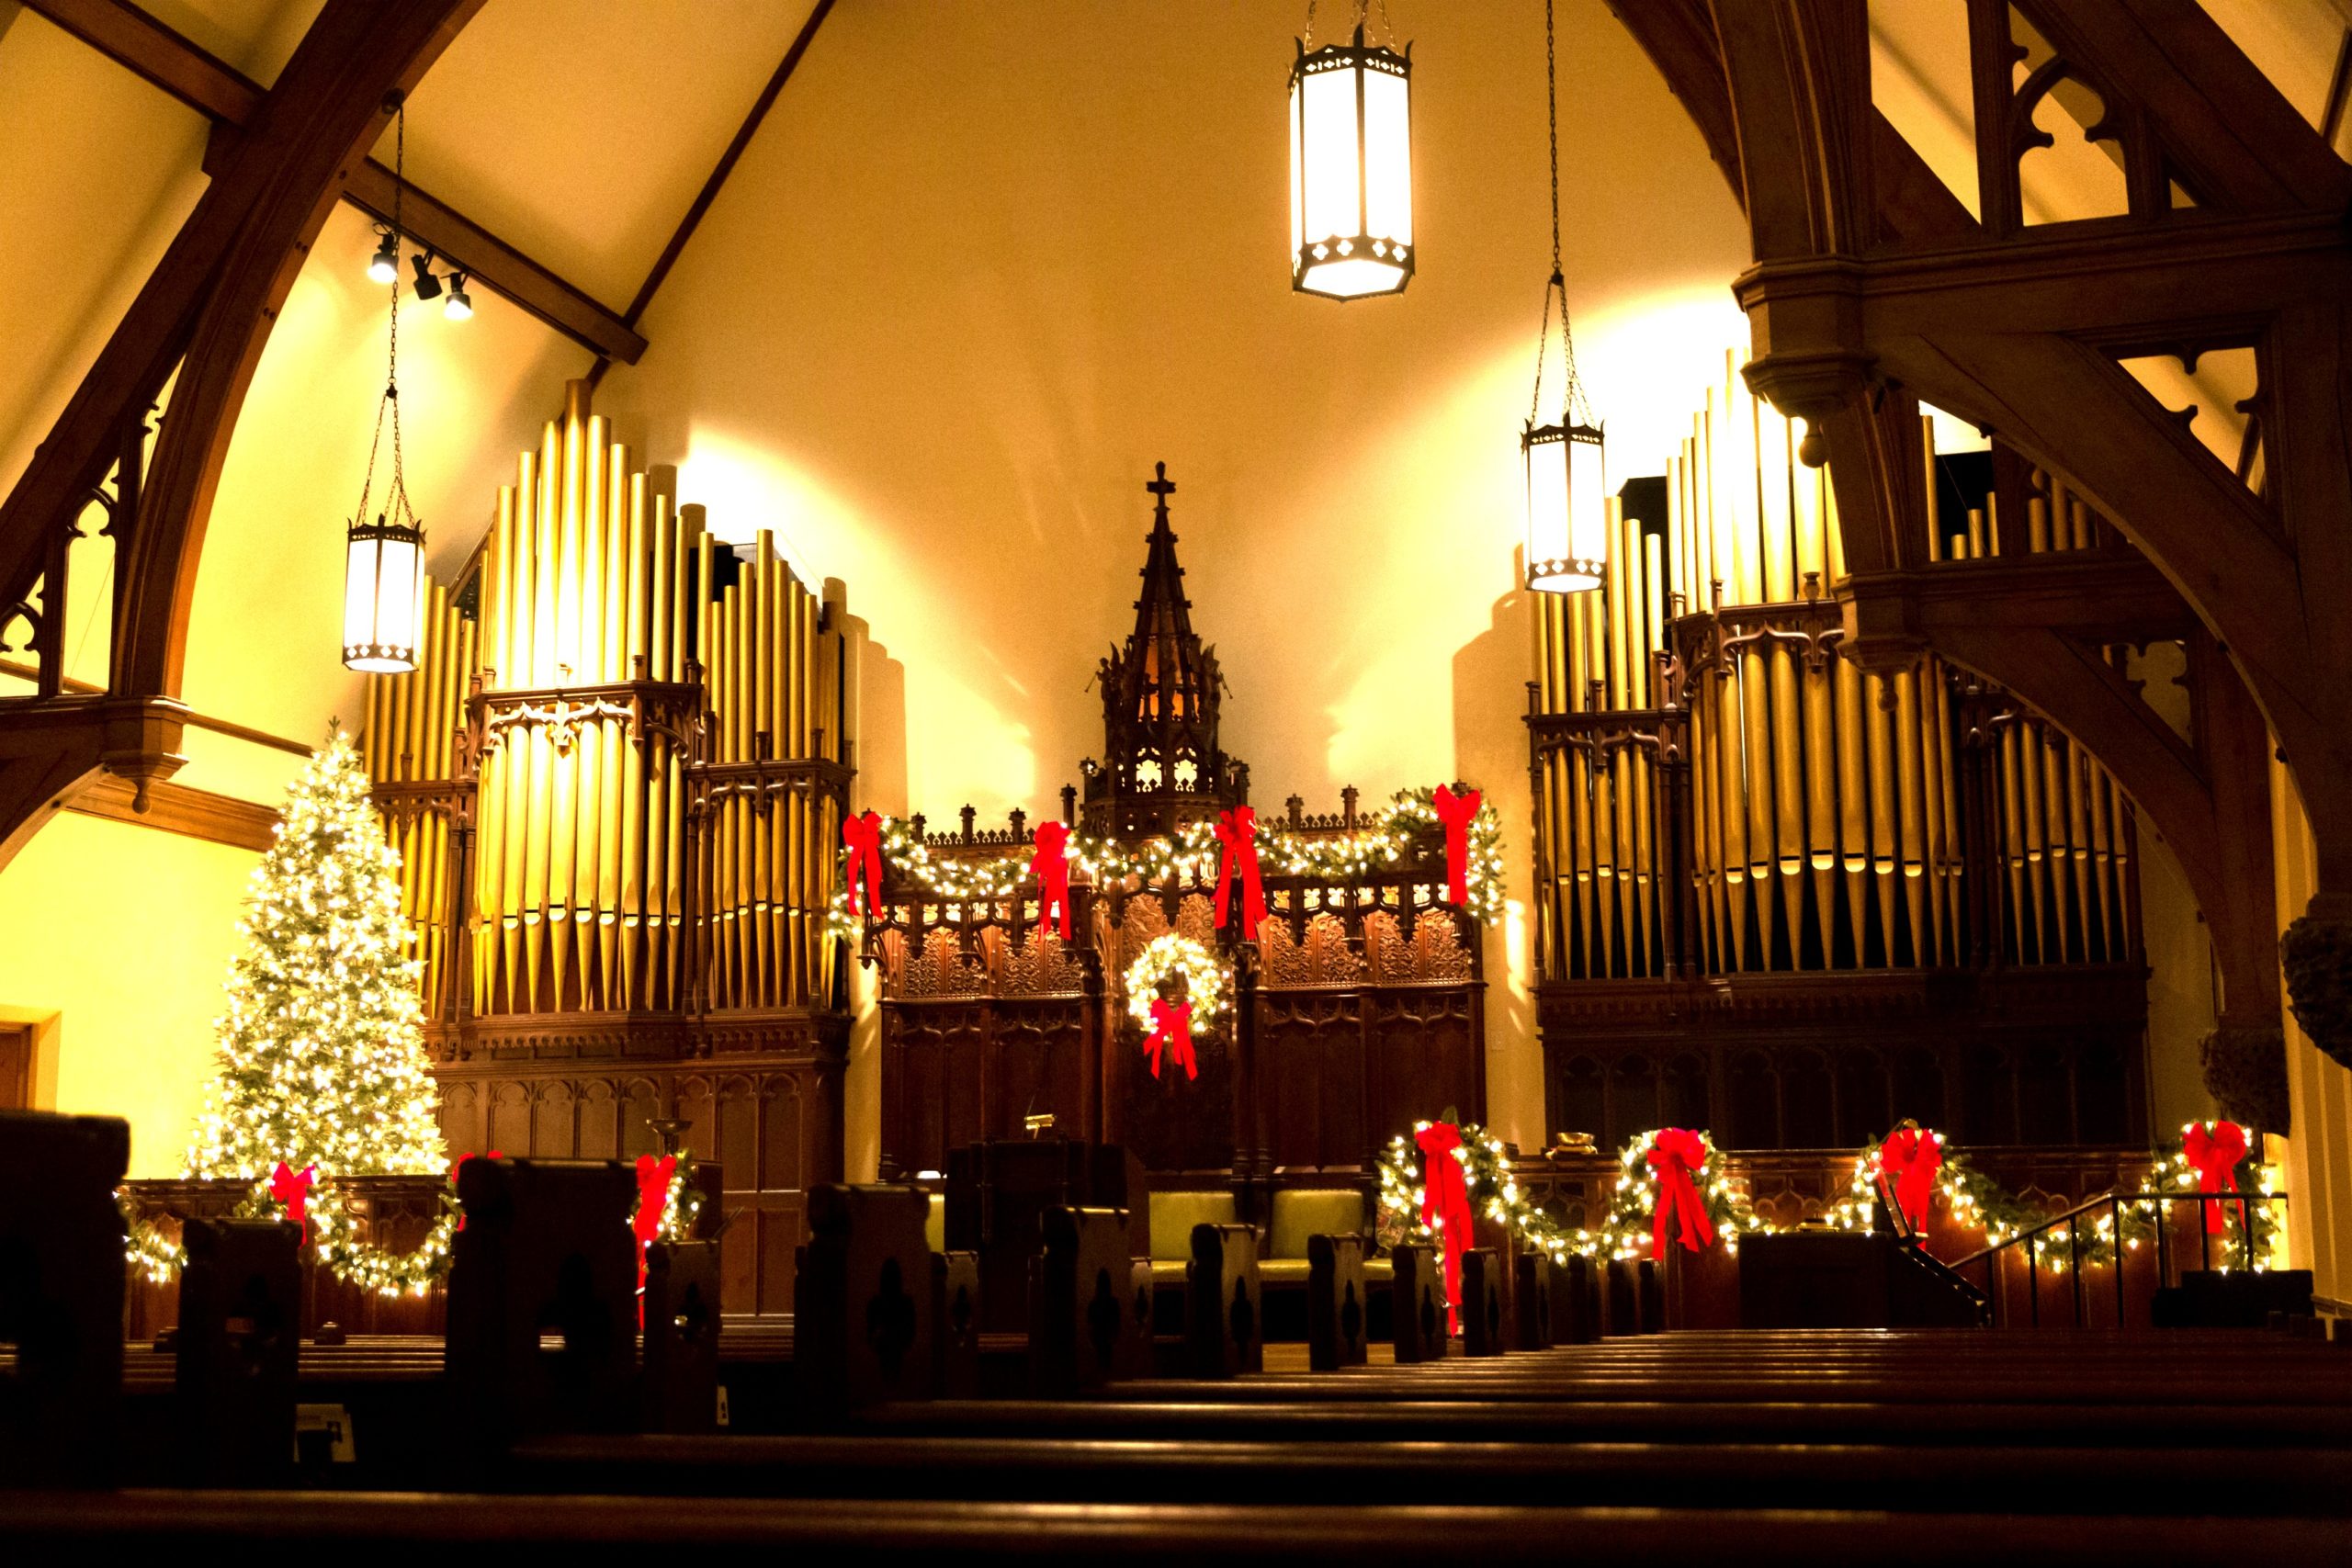 Winter Holiday Decorations, First Unitarian Society of Milwaukee